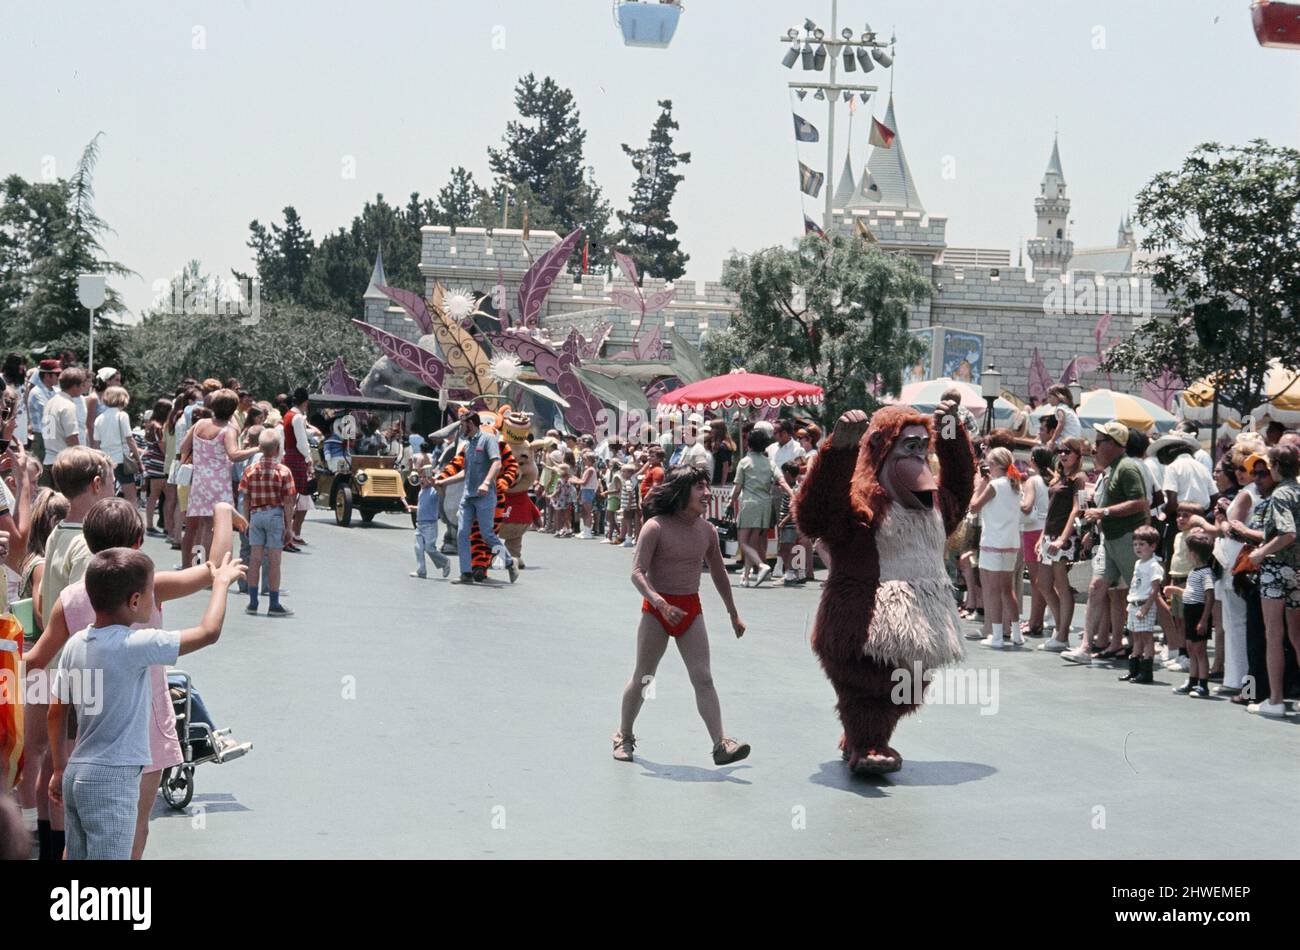 Scenes at the Disneyland theme park in Anaheim, California, United States.  Jungle book characters Mowgli and Baloo during the Main Street parade.  June 1970. Stock Photo